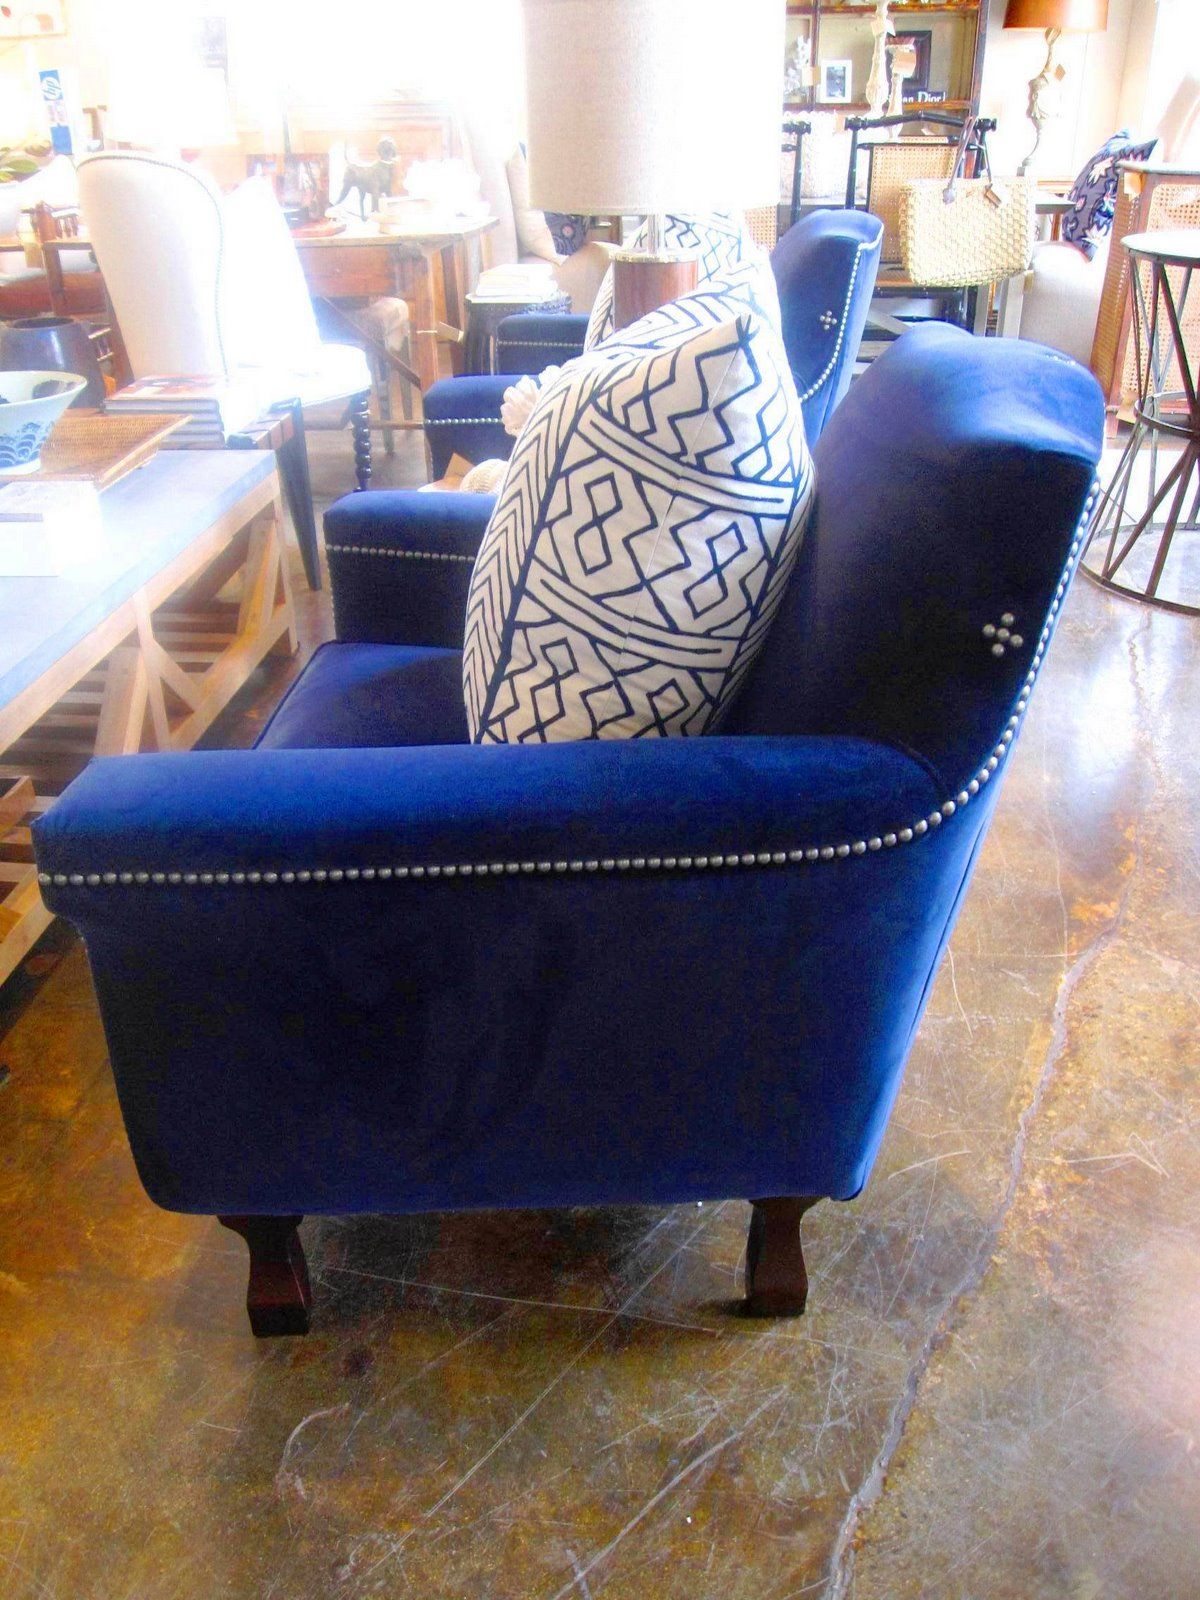 Cococozy Find: A Luxe Blue Velvet Chair! | Cococozy Within Royal Blue Round Accent Stools With Fringe Trim (View 6 of 20)